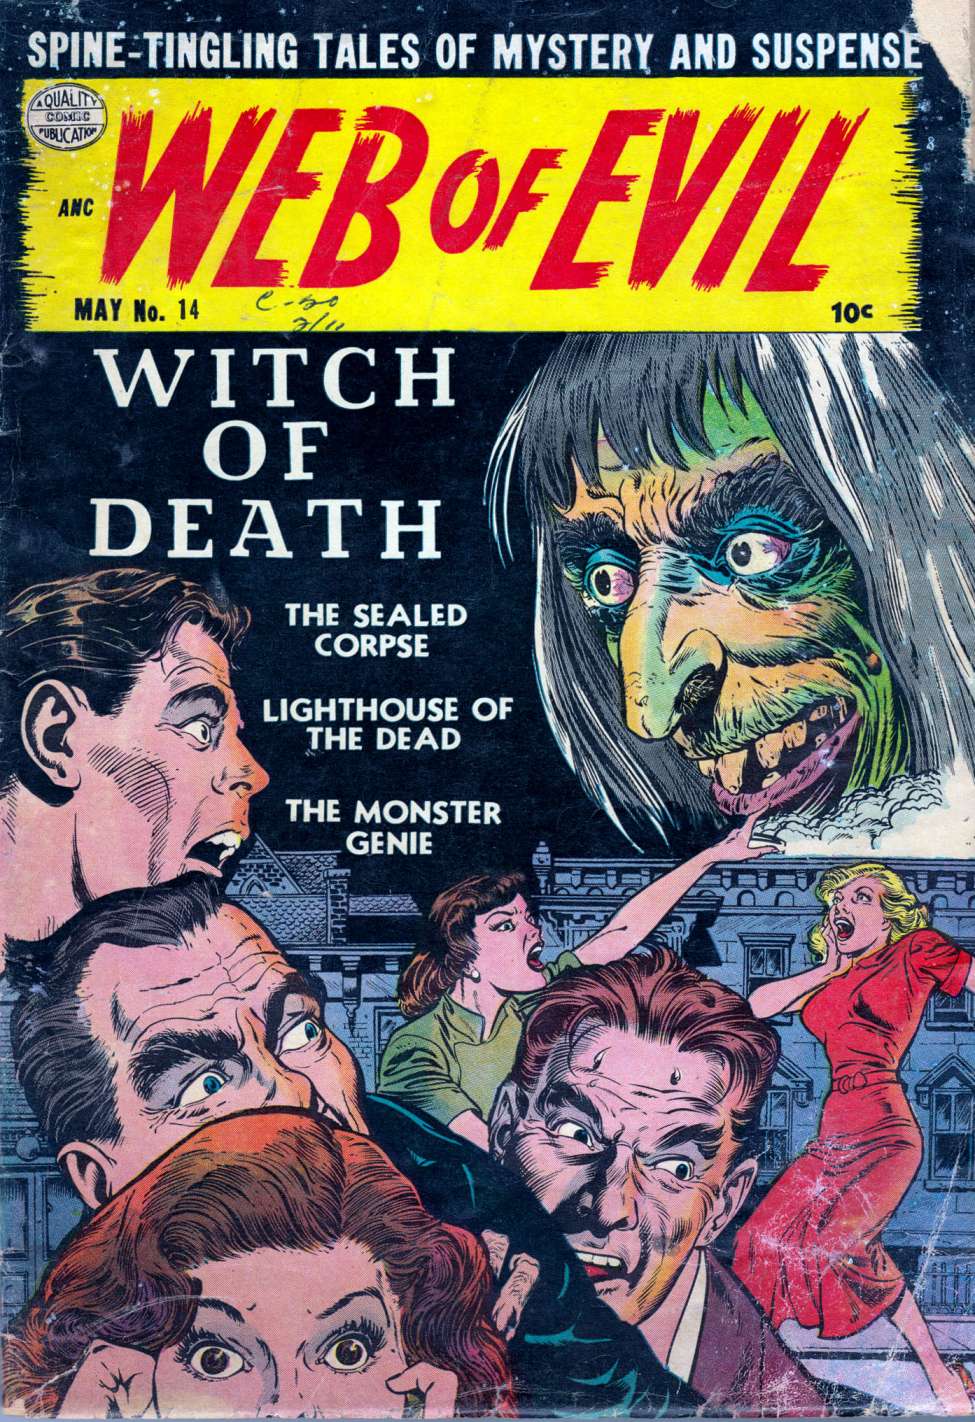 Comic Book Cover For Web of Evil 14